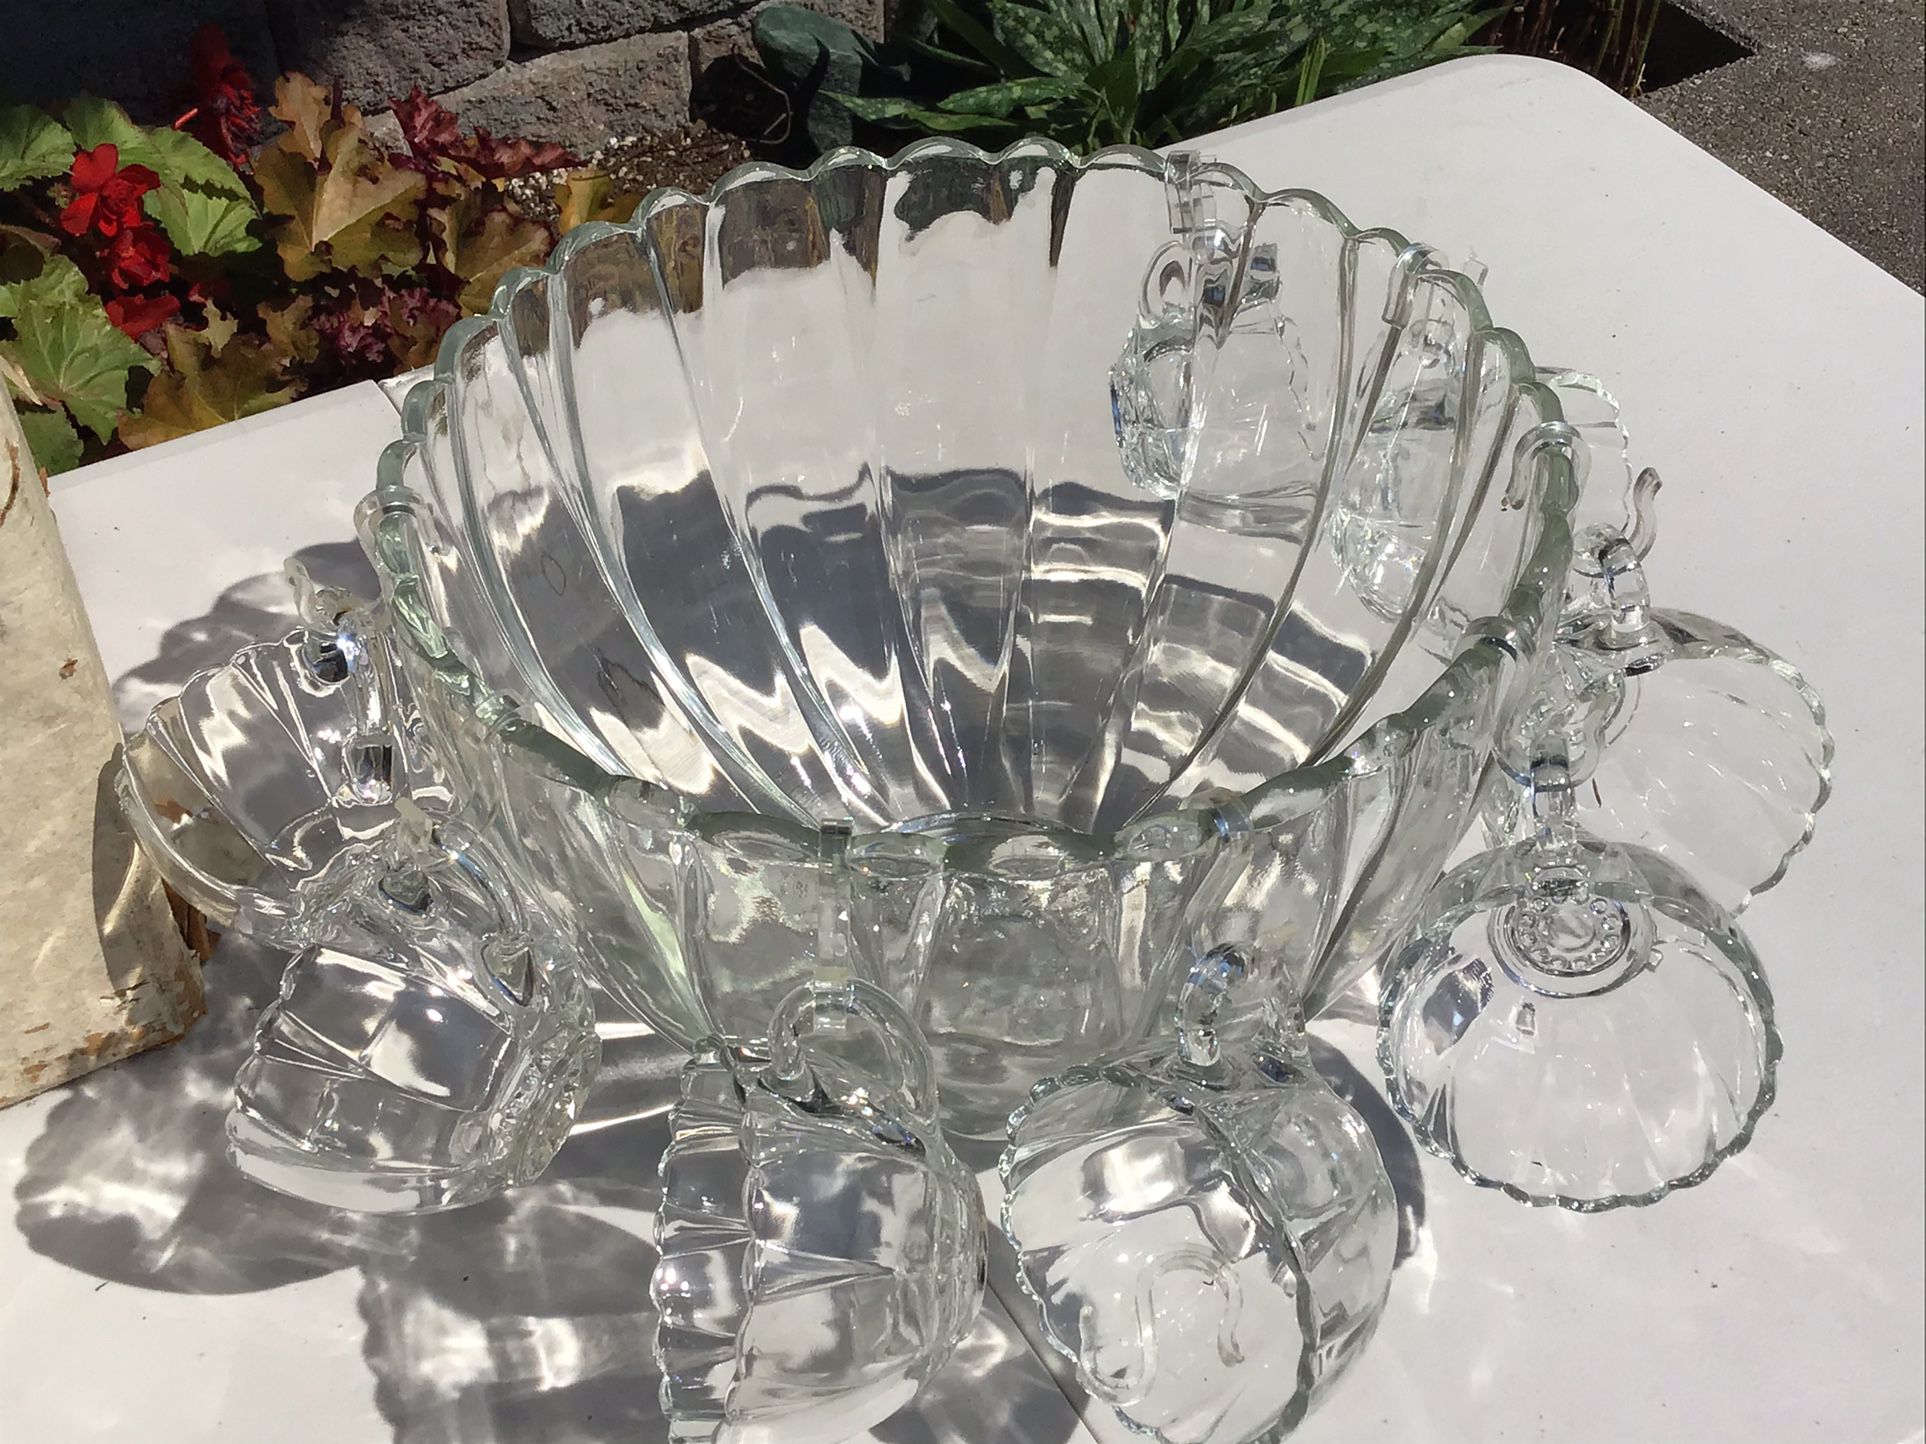 Vintage Edgewood 18 Piece Crystal Punch Set with Original Box by Hazelware